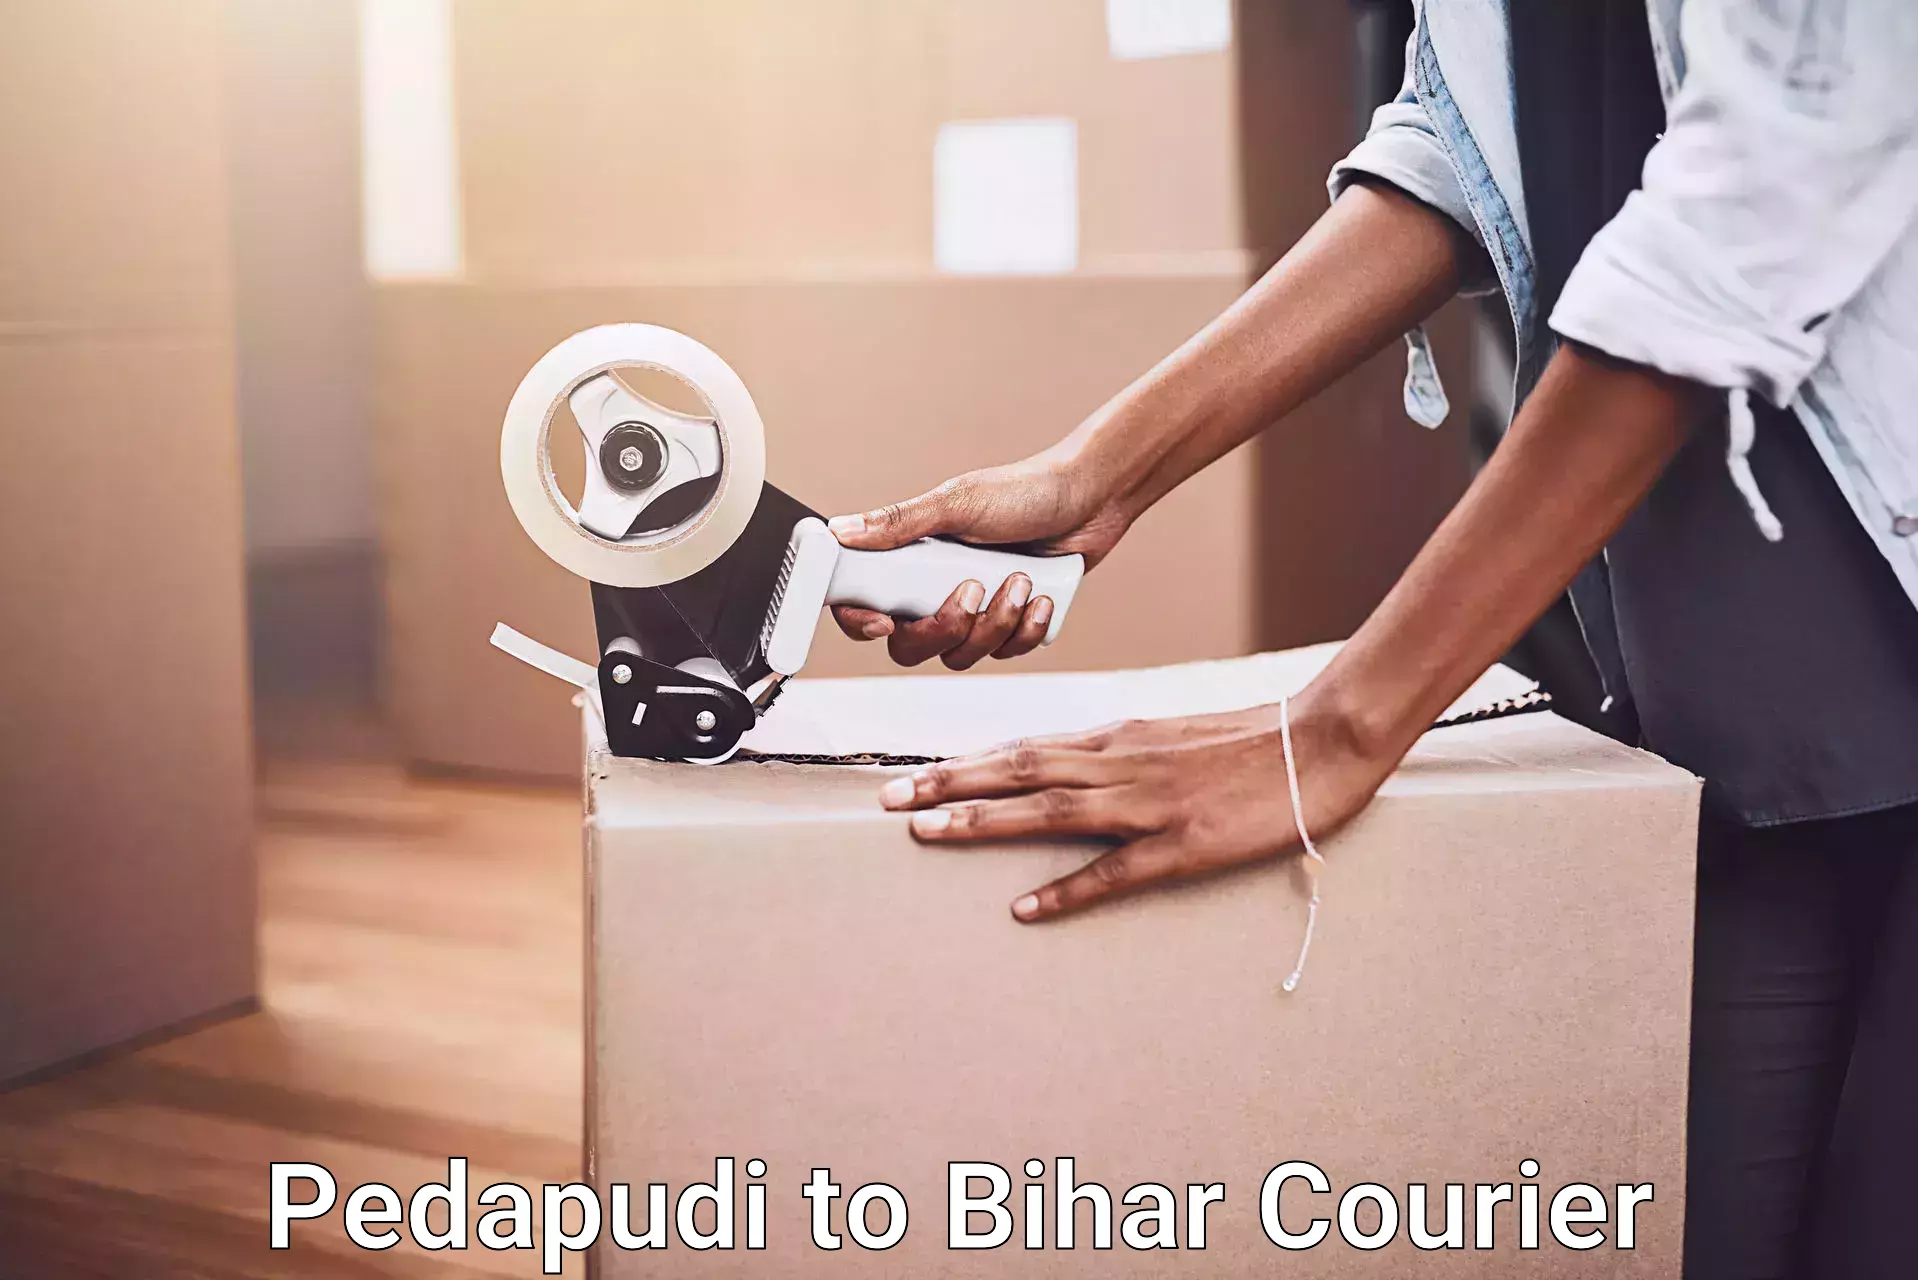 Specialized moving company Pedapudi to Bihar